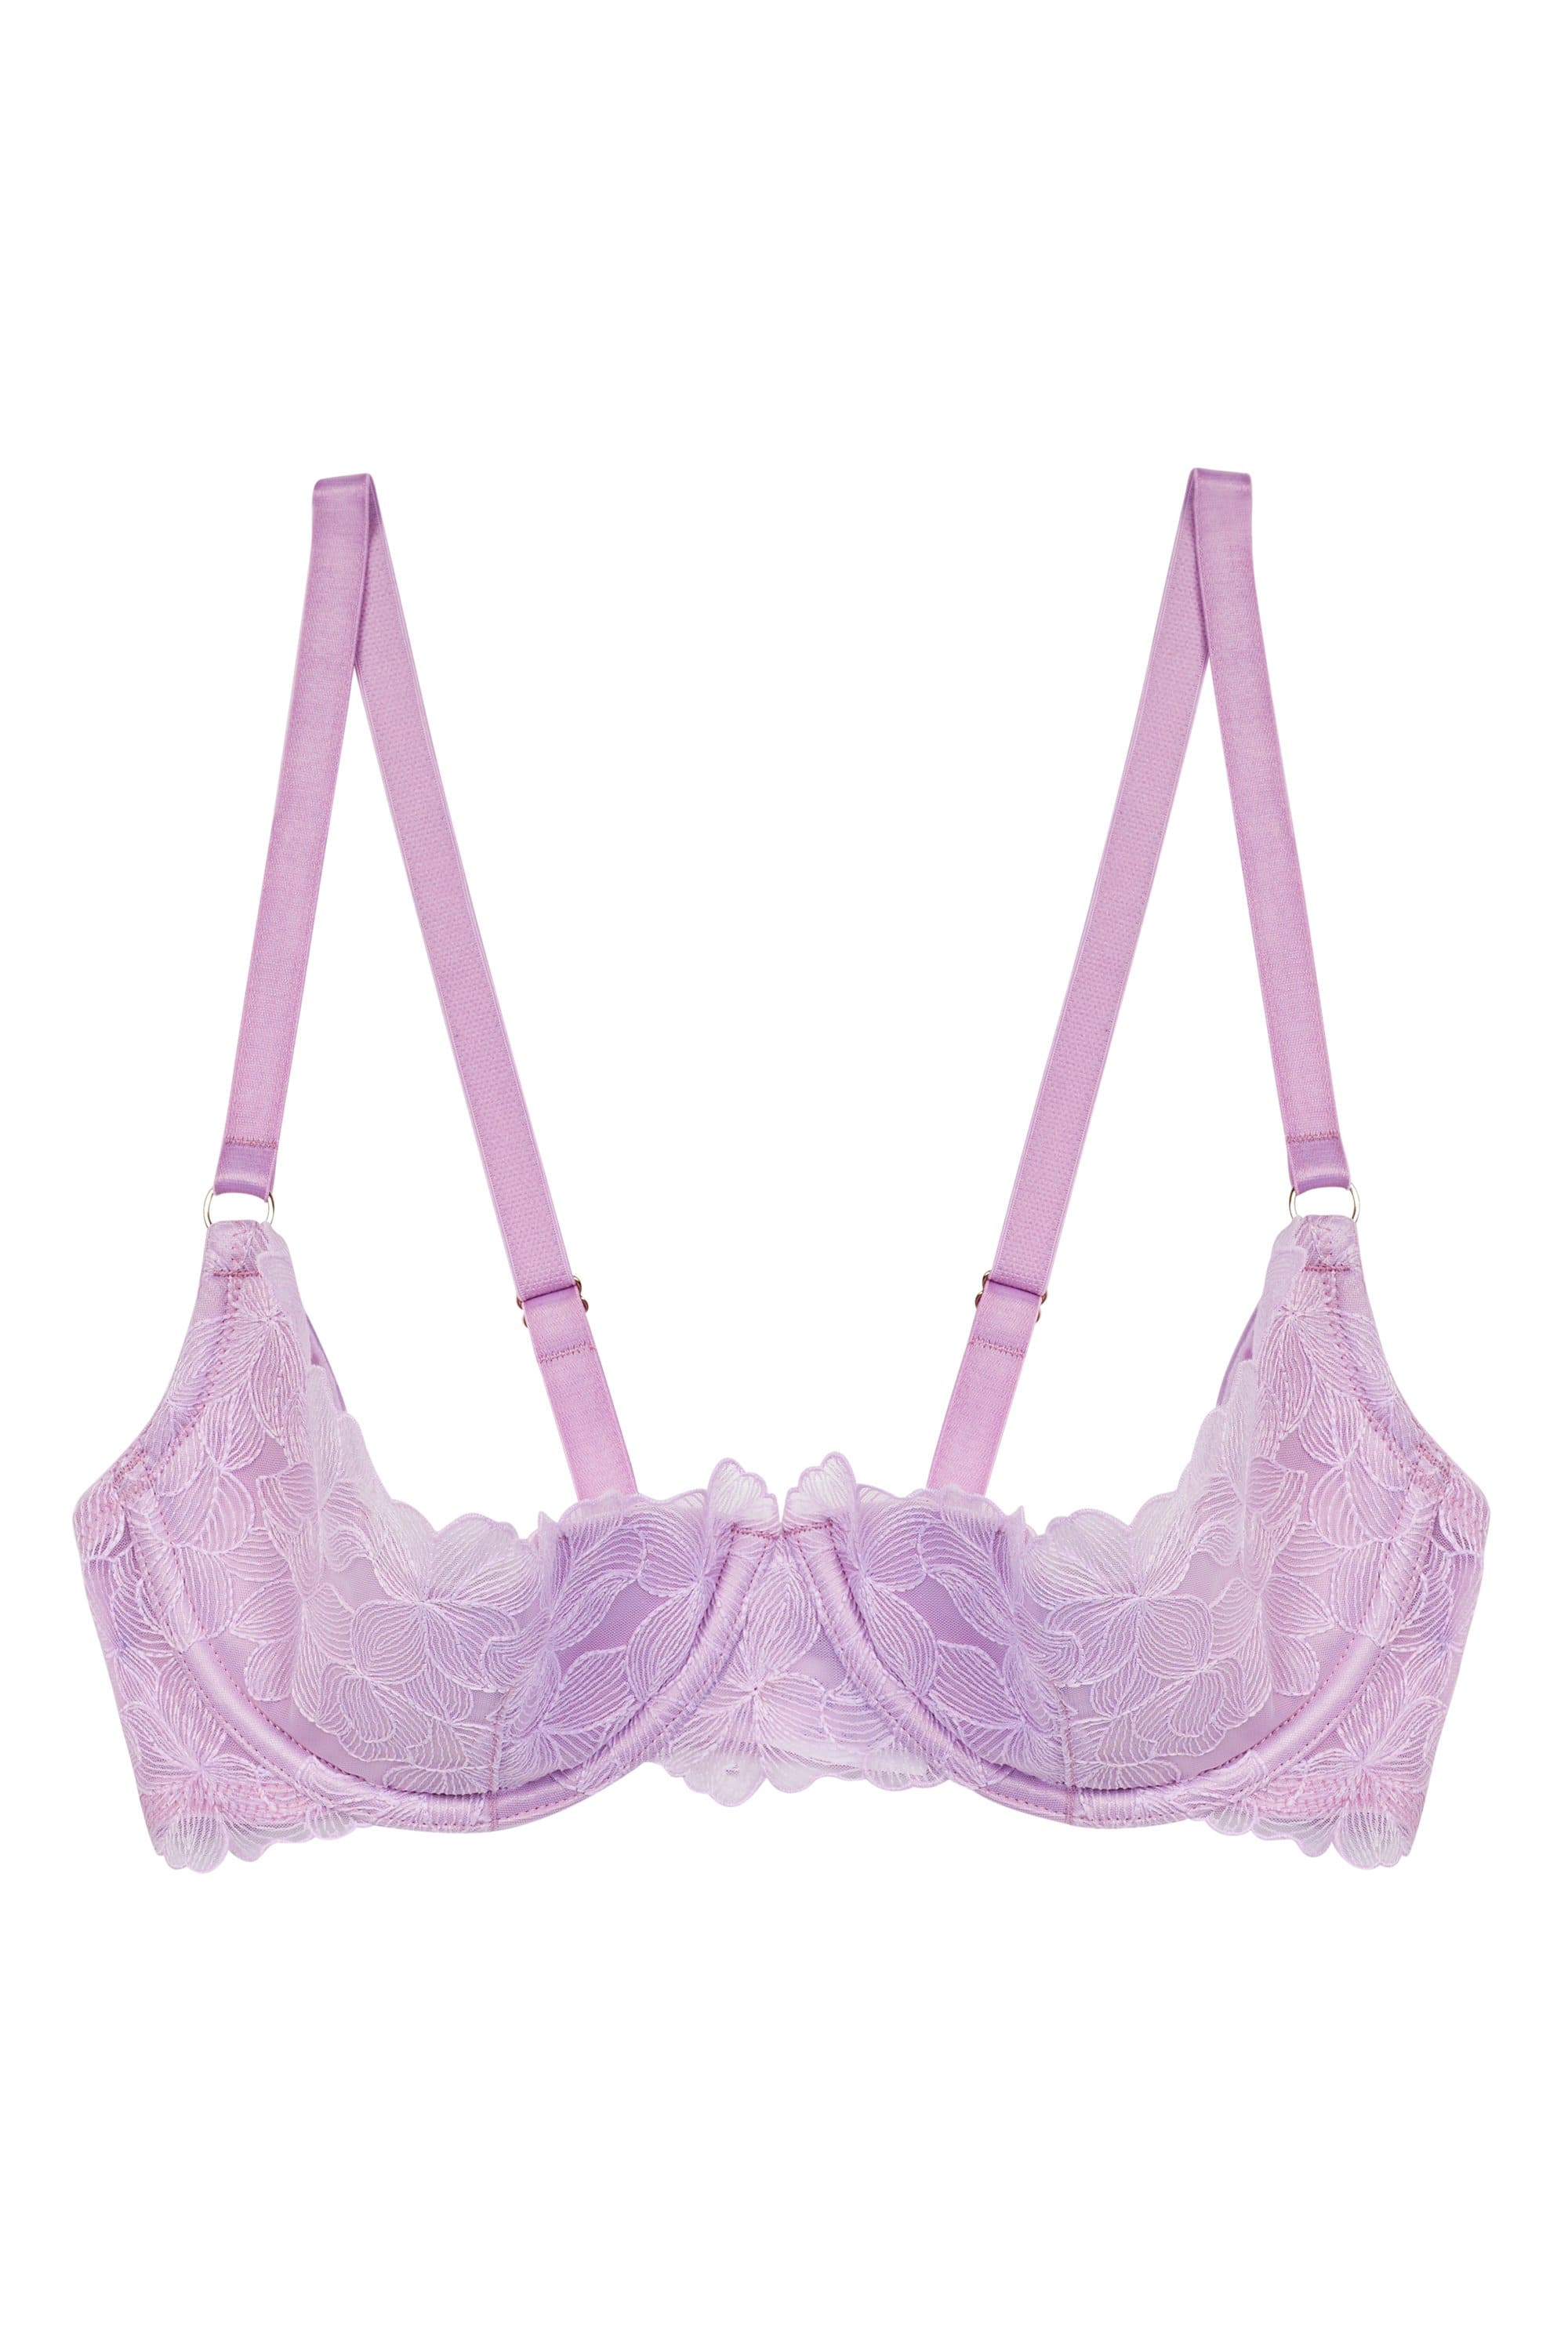 Prisma's Lavender Daily Fit Moulded Basic Bra for Comfort and Style